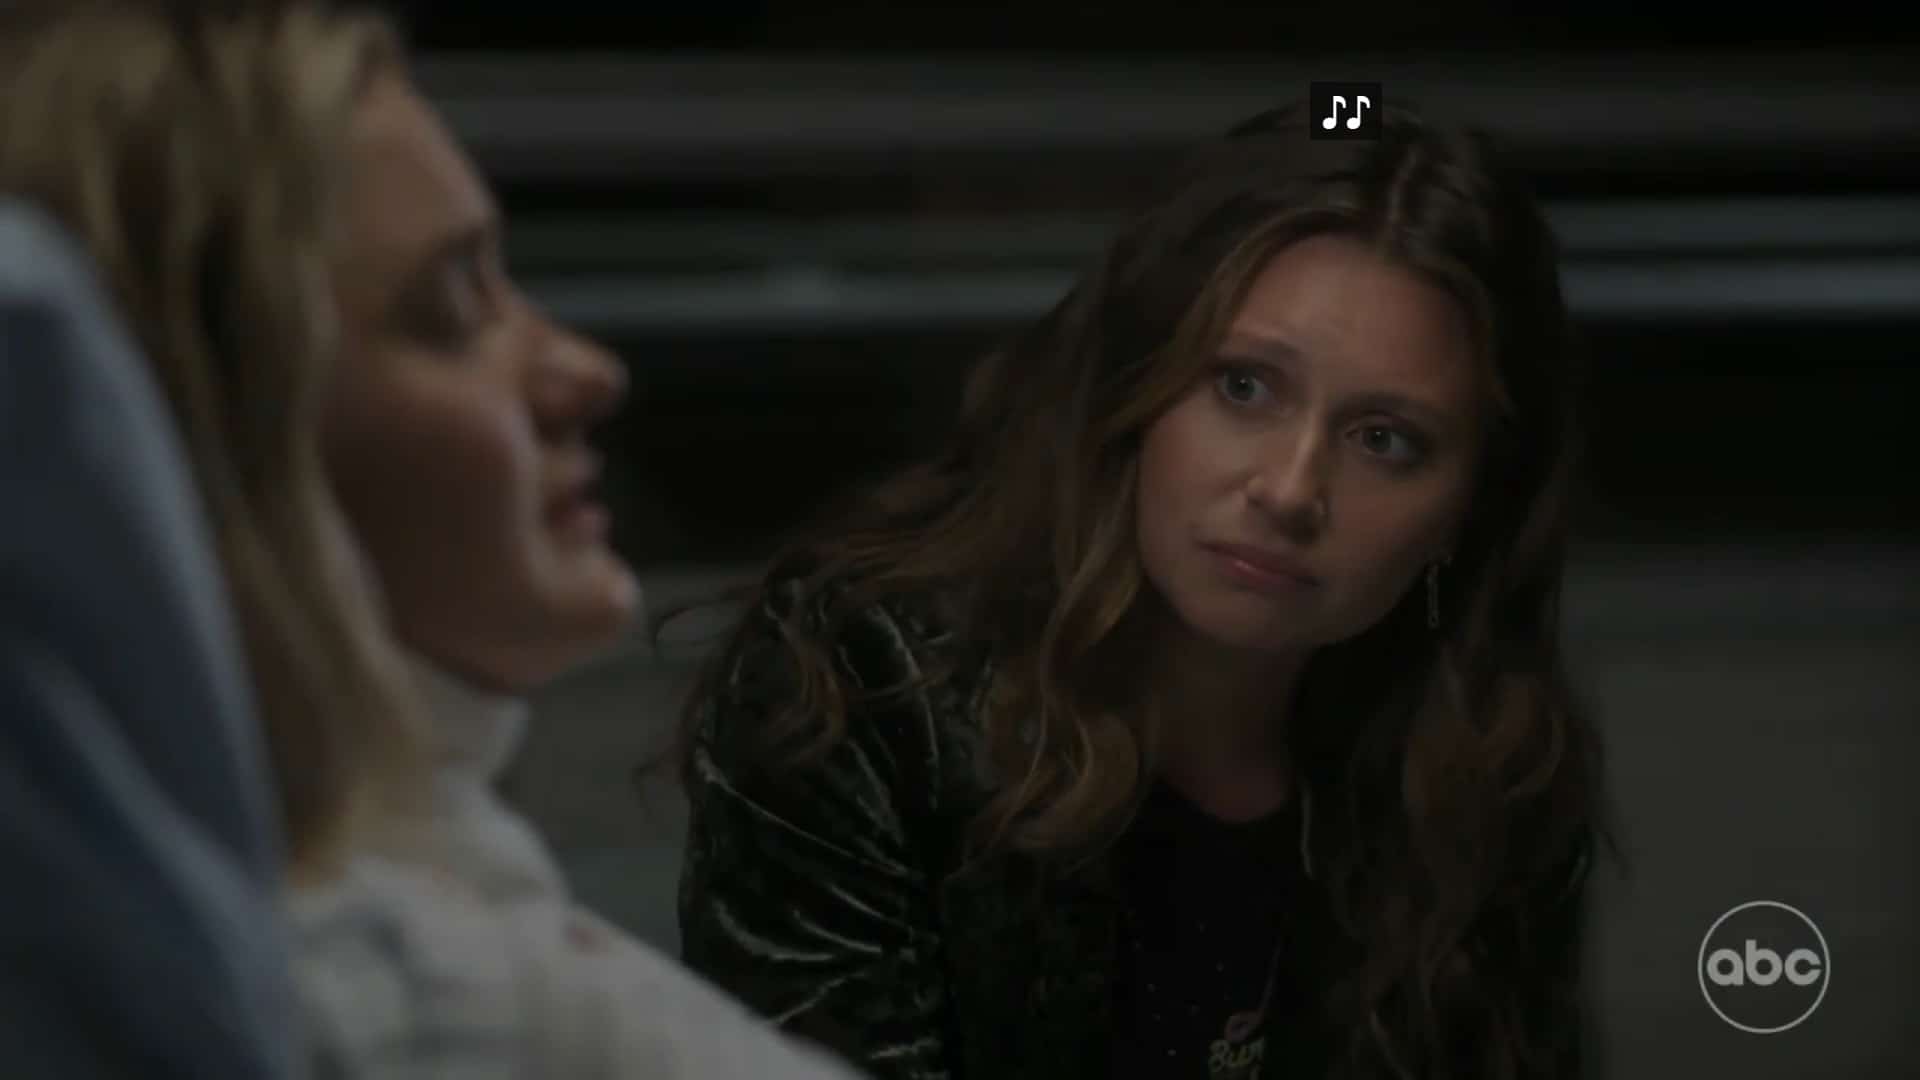 Lexi (Aly Michalka) worried about her sister